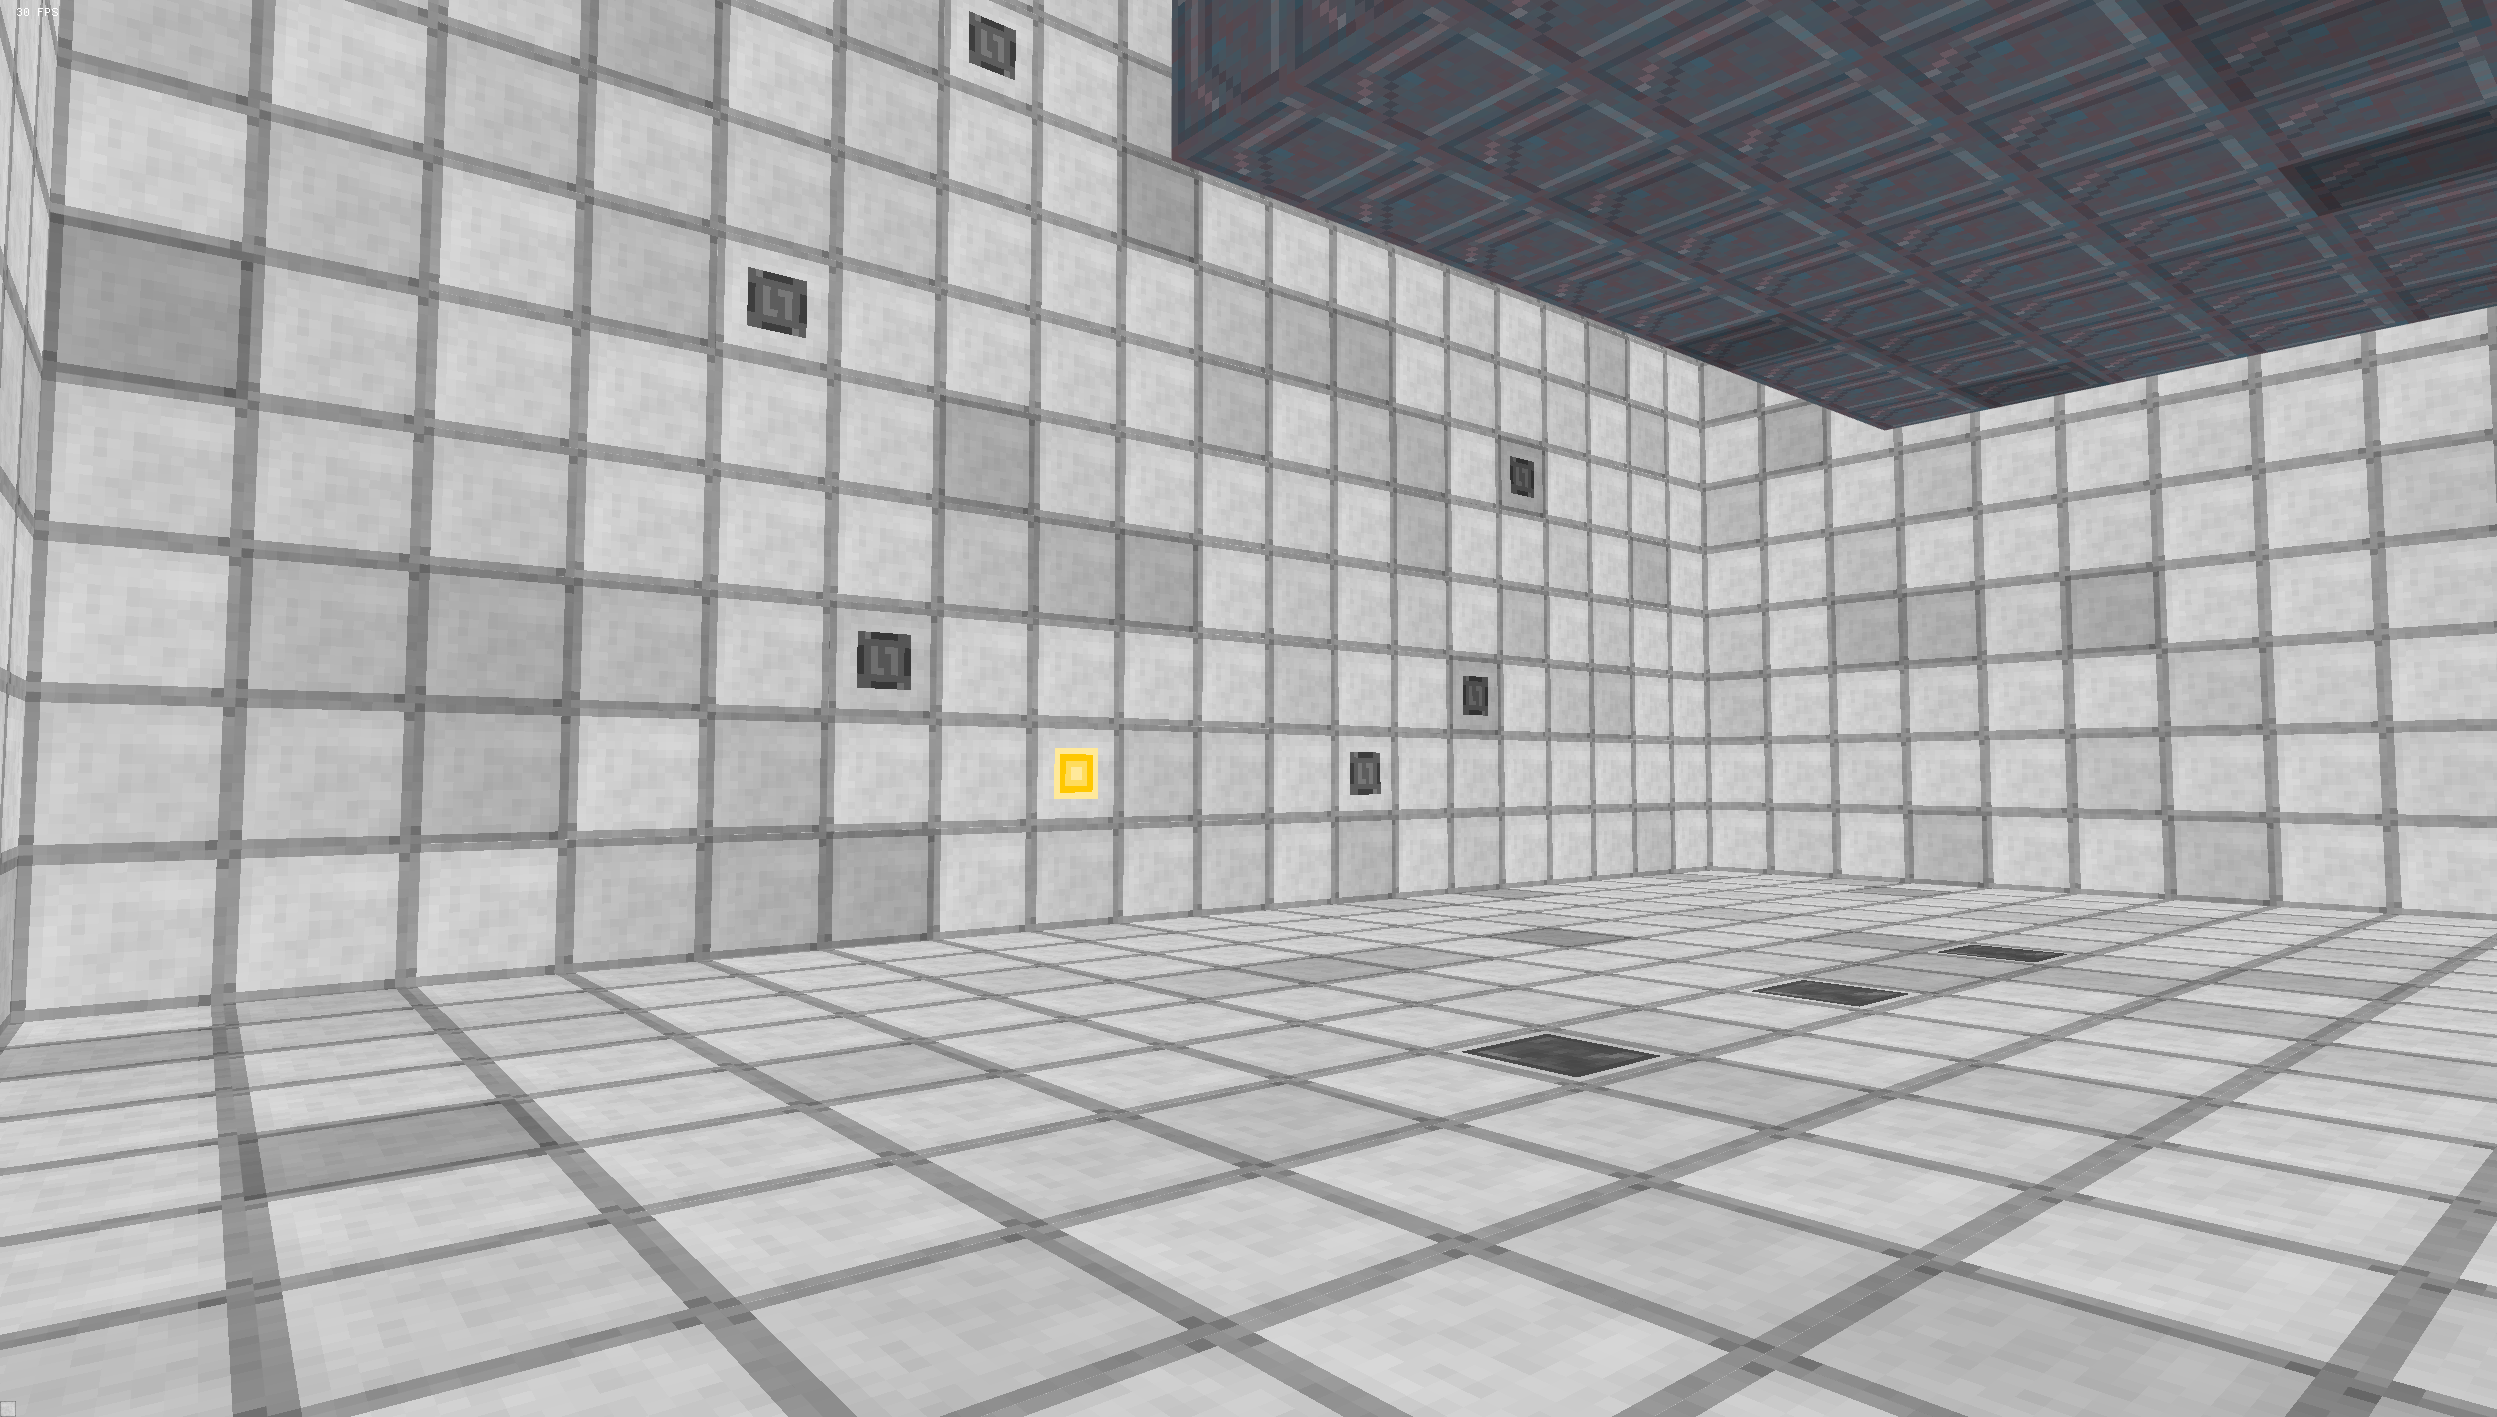 Screenshot of Liminal Lab 000 showing a white-walled laboratory test chamber with buttons on the floor, lights on the wall, and a dark cube levitating overhead.